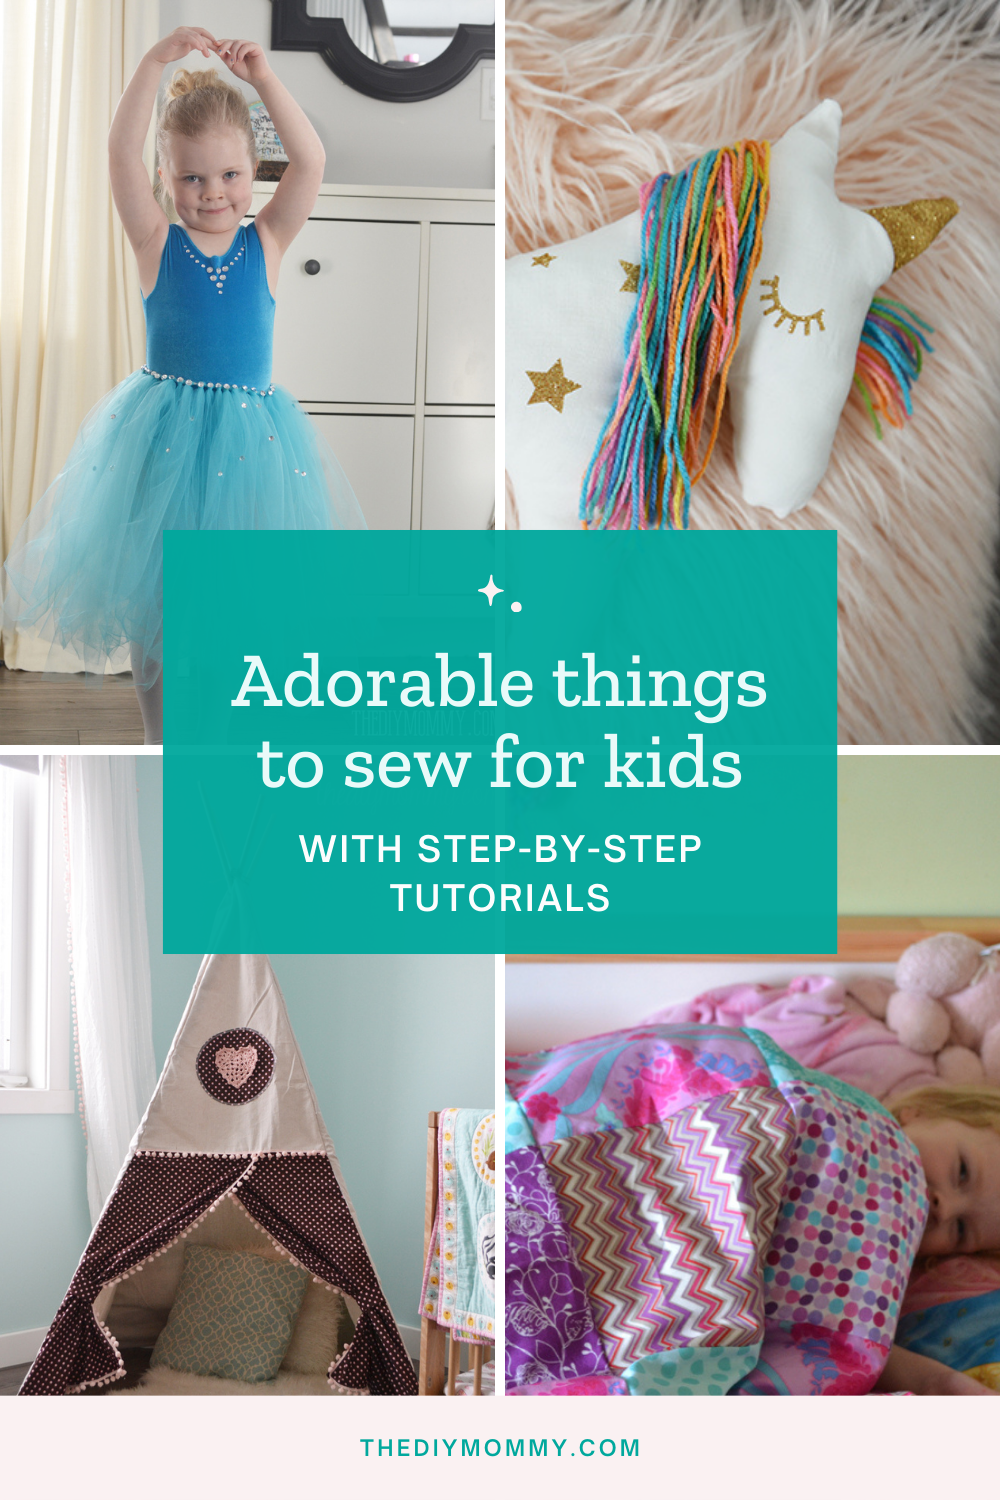 Sew Much Fun: 20+ Easy and Creative Sewing Projects for Kids